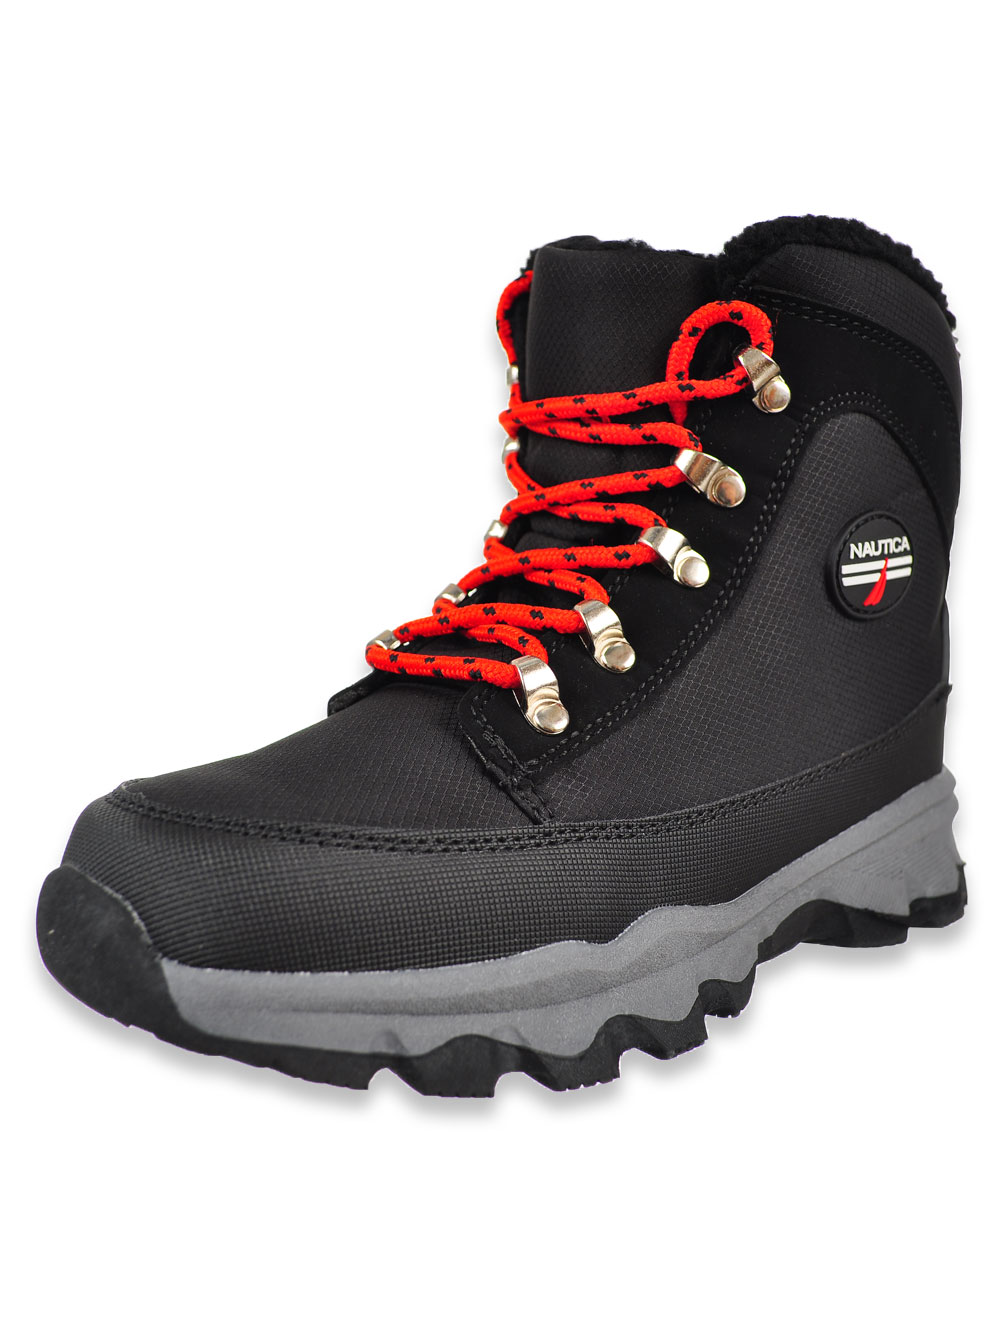 Boys' ALX Hiker Boots by Nautica in 